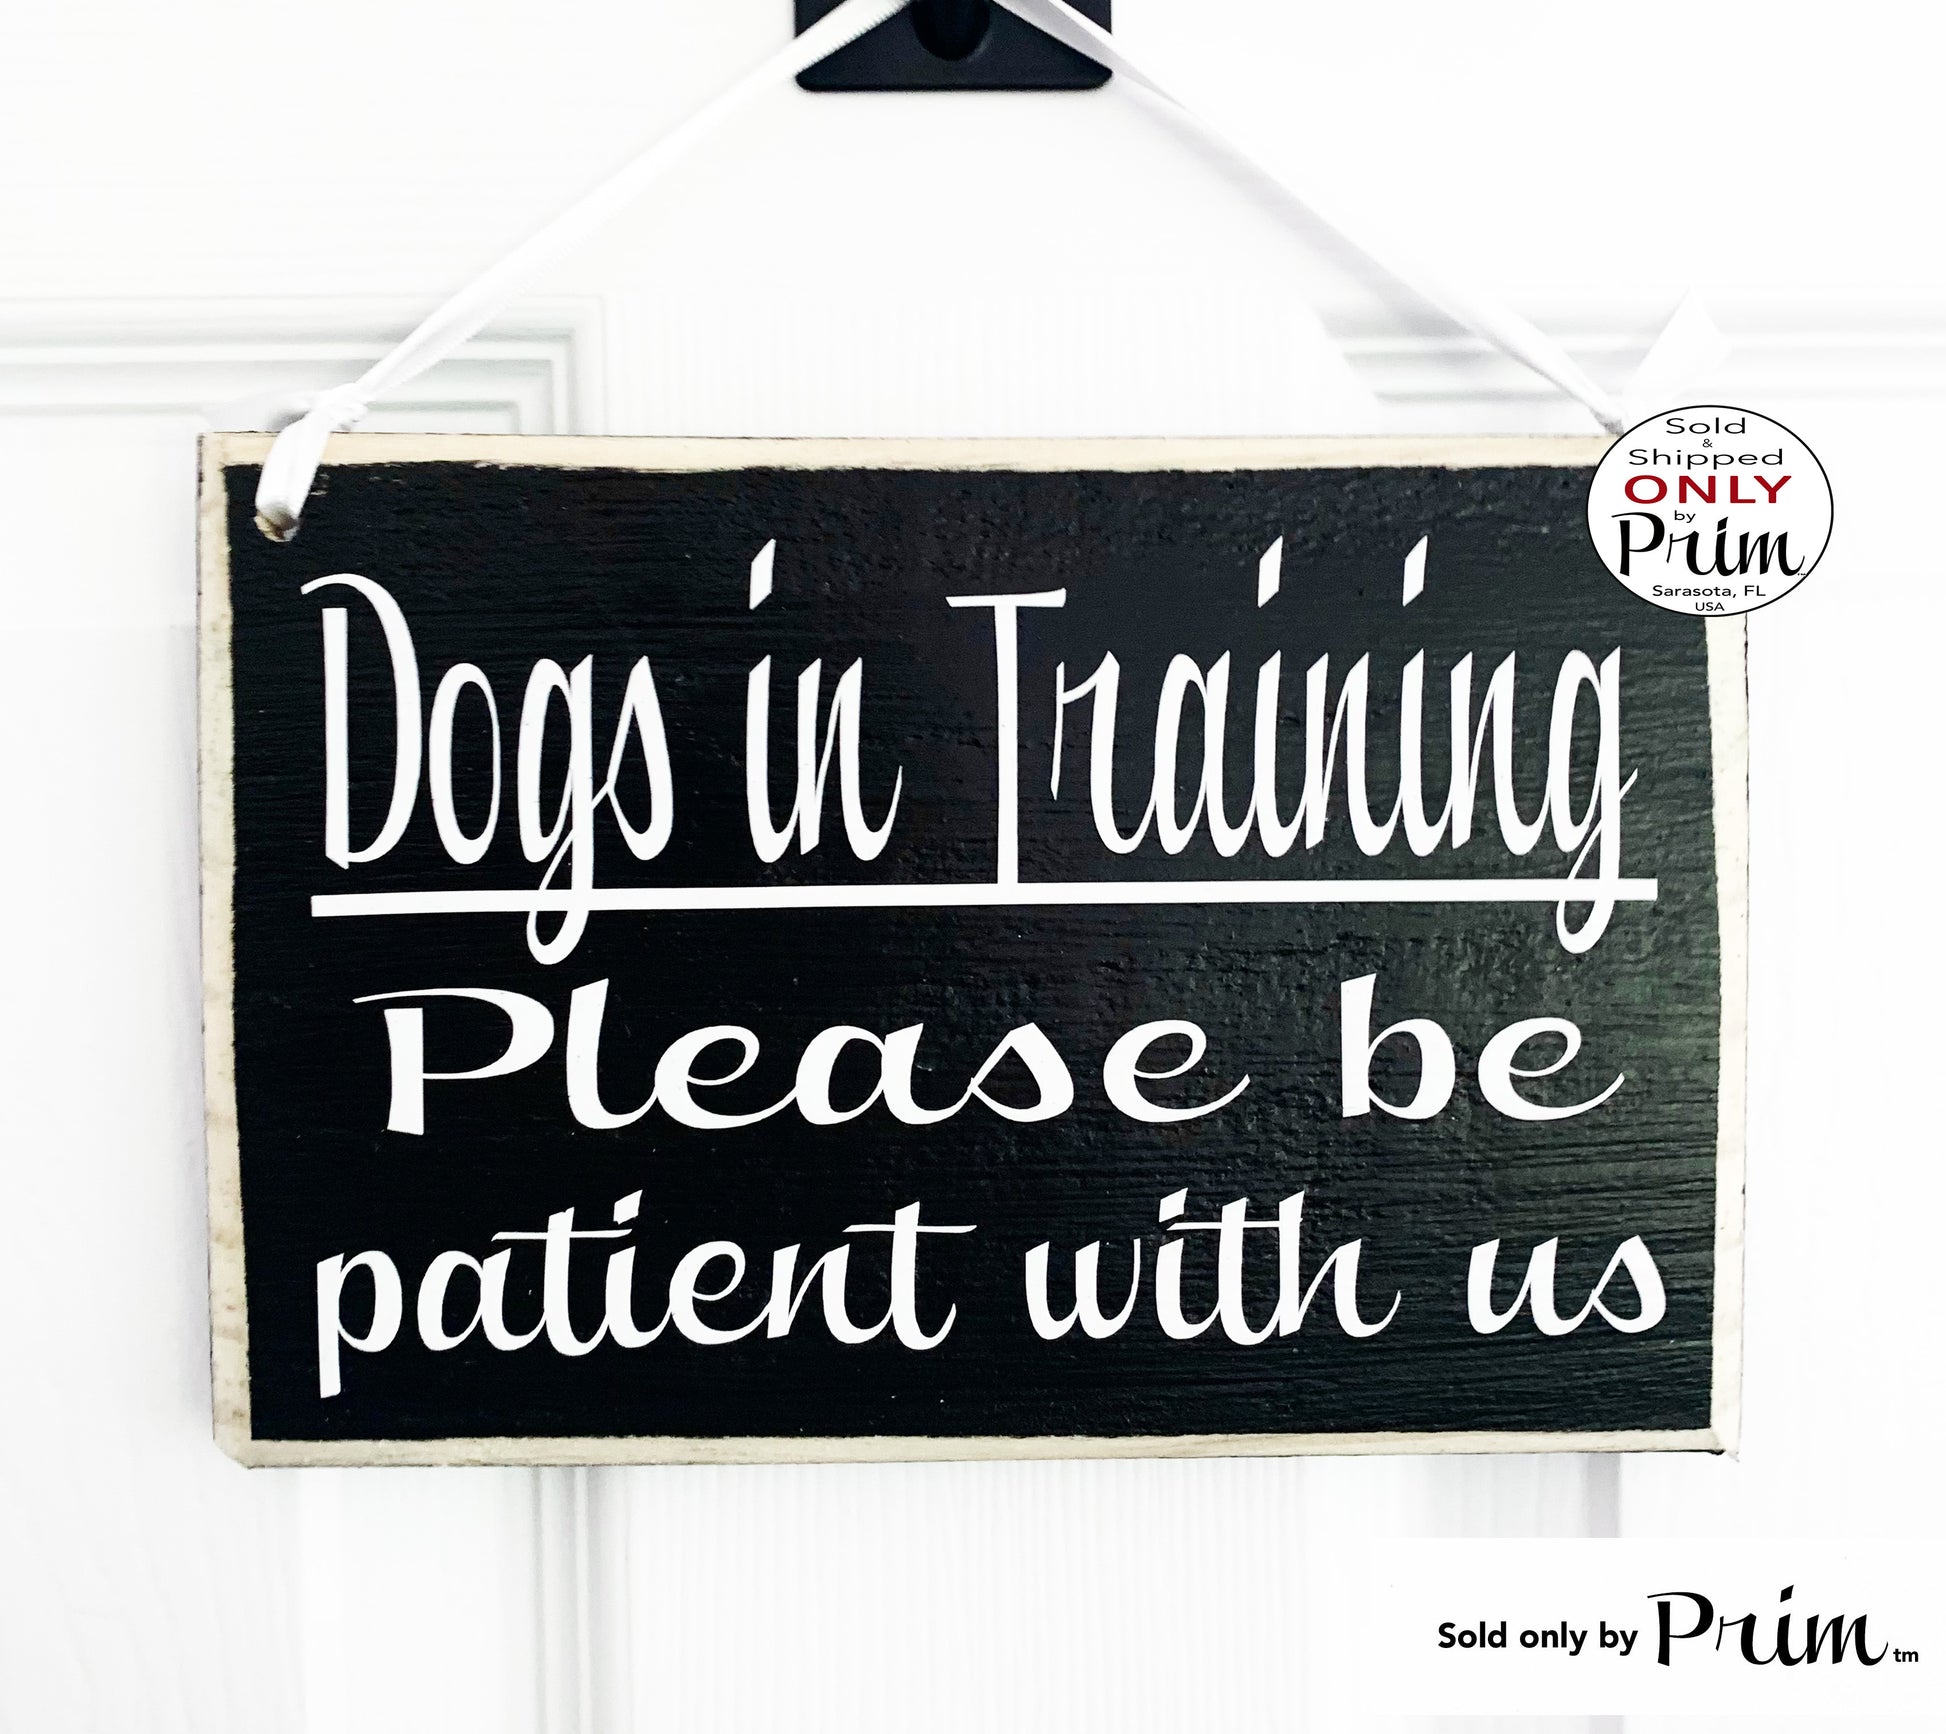 Designs by Prim 8x6 Dogs In Training Please Be Patient With Us Custom Wood Sign Please Do Not Disturb Session K9 School Progress Class Obedience Door Plaque